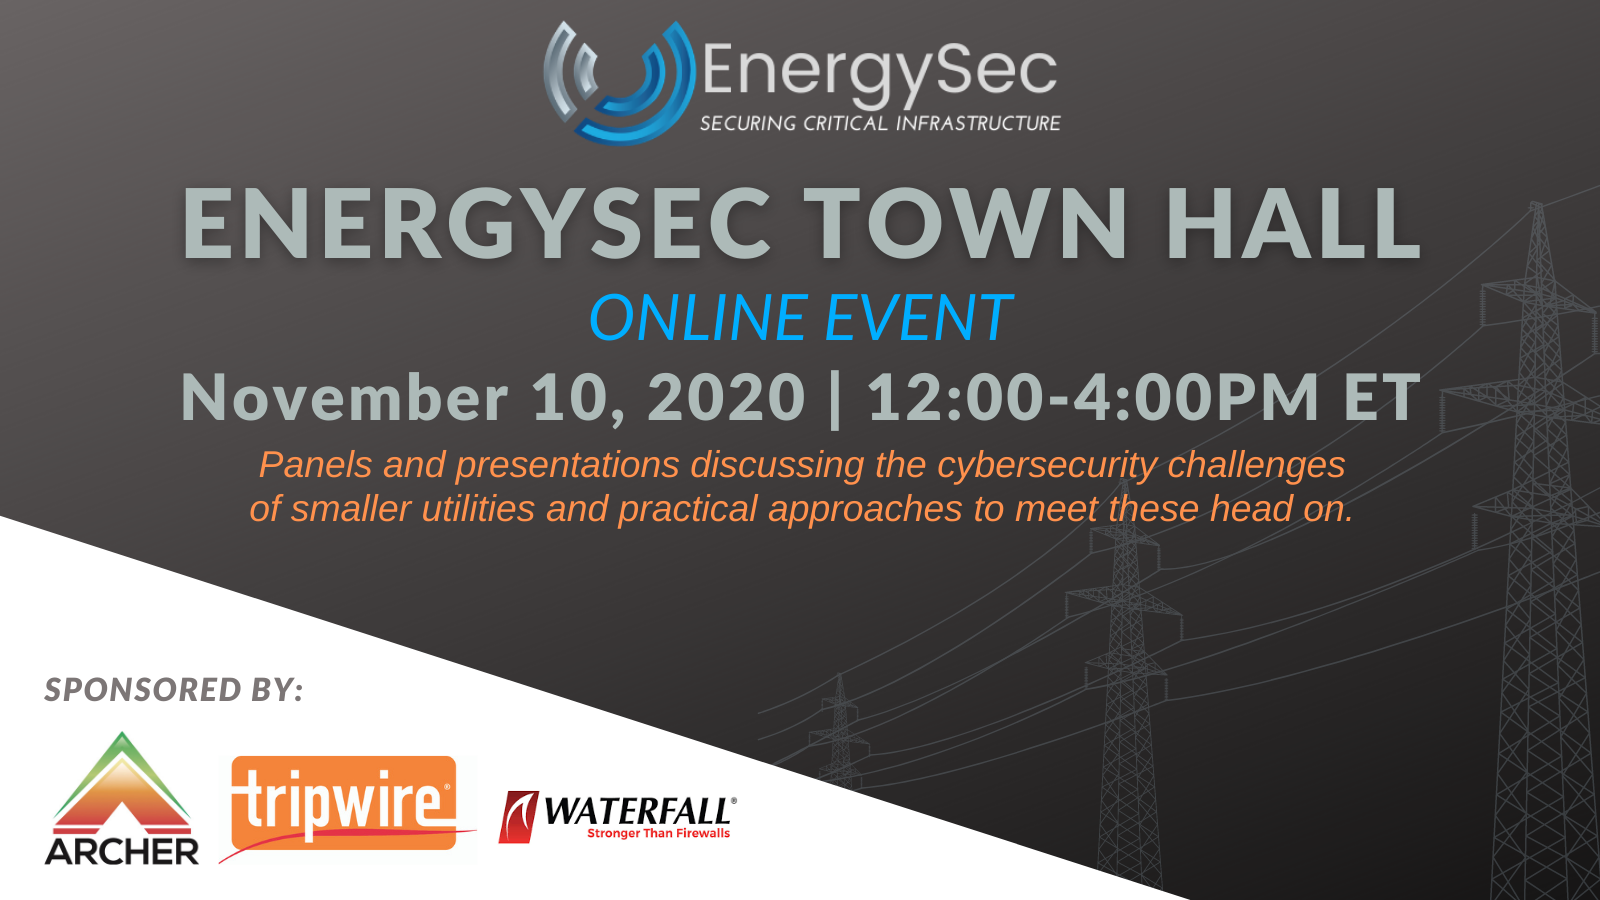 EnergySec Town Hall, Online Event, November 10, 2020, 10:00-4:00PM ET, Panels and presentations discussing the cybersecurity challenges of smaller utilities and practical approaches to meet these head on. Sponsored by Archer, Tripwire and Waterfall